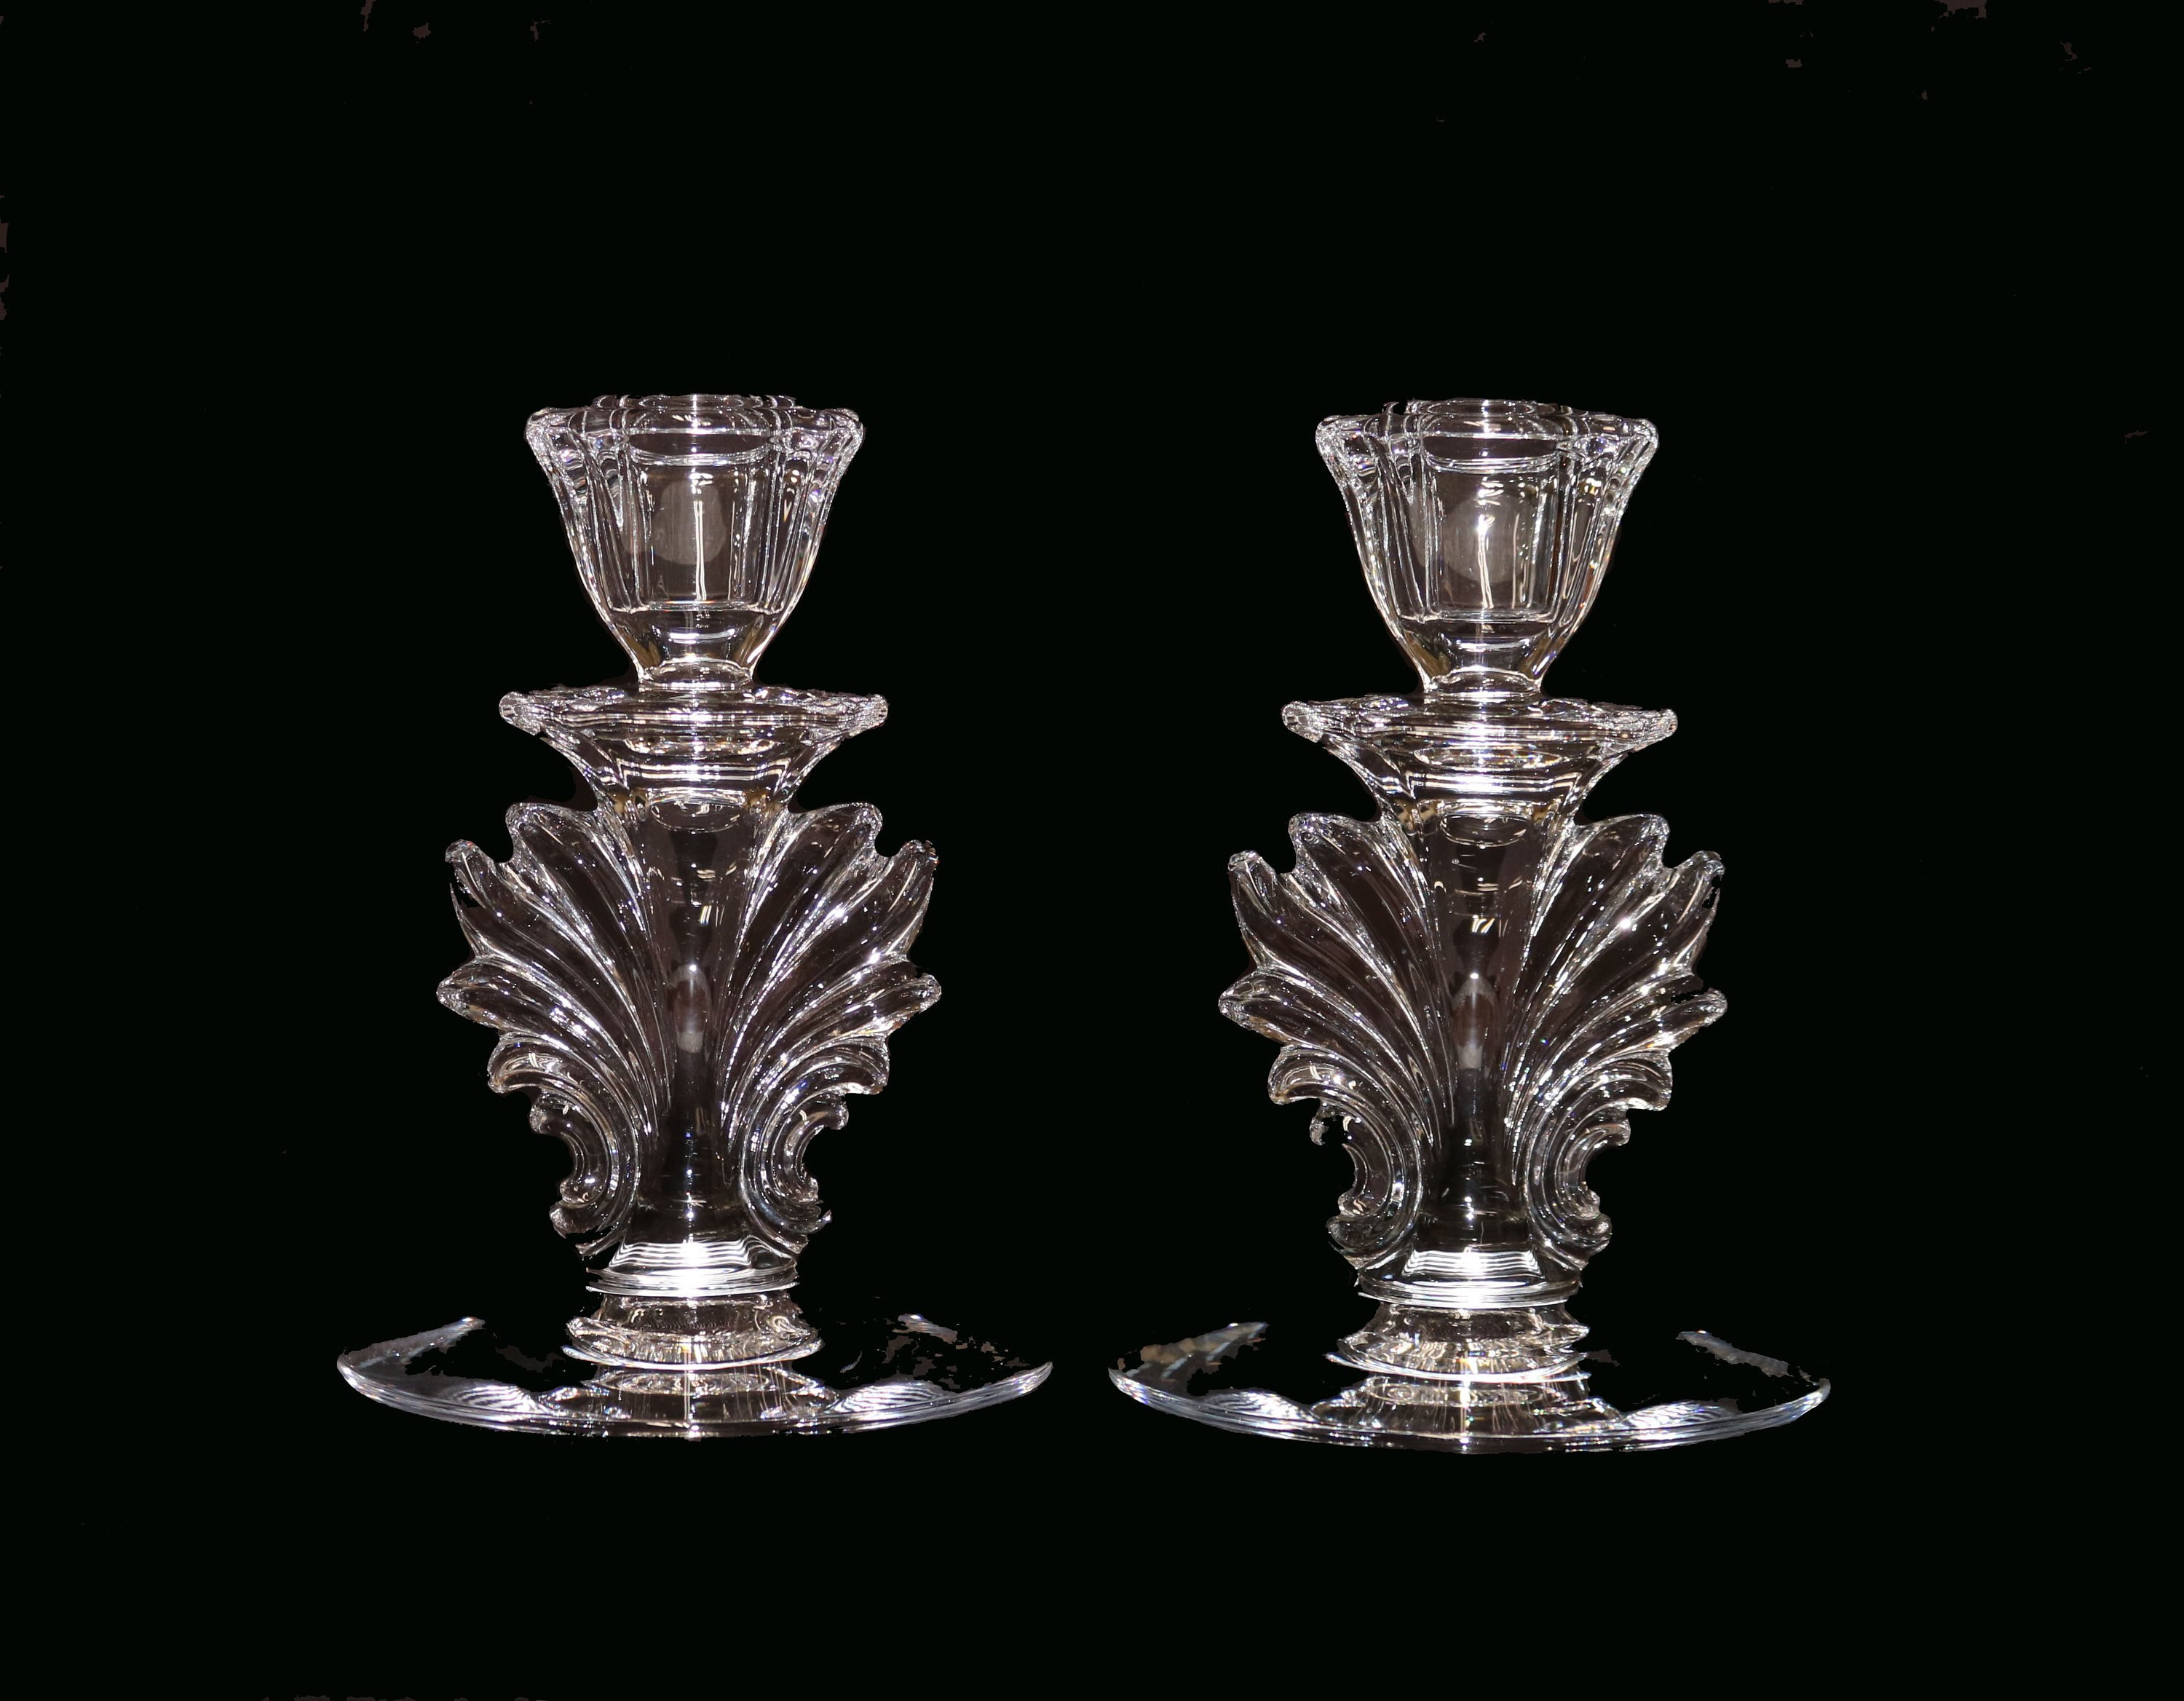 15 attractive Vintage Viking Glass Vases 2022 free download vintage viking glass vases of fostoria pair of vintage baroque crystal candlesticks etsy pertaining to dc29fc294c28ezoom